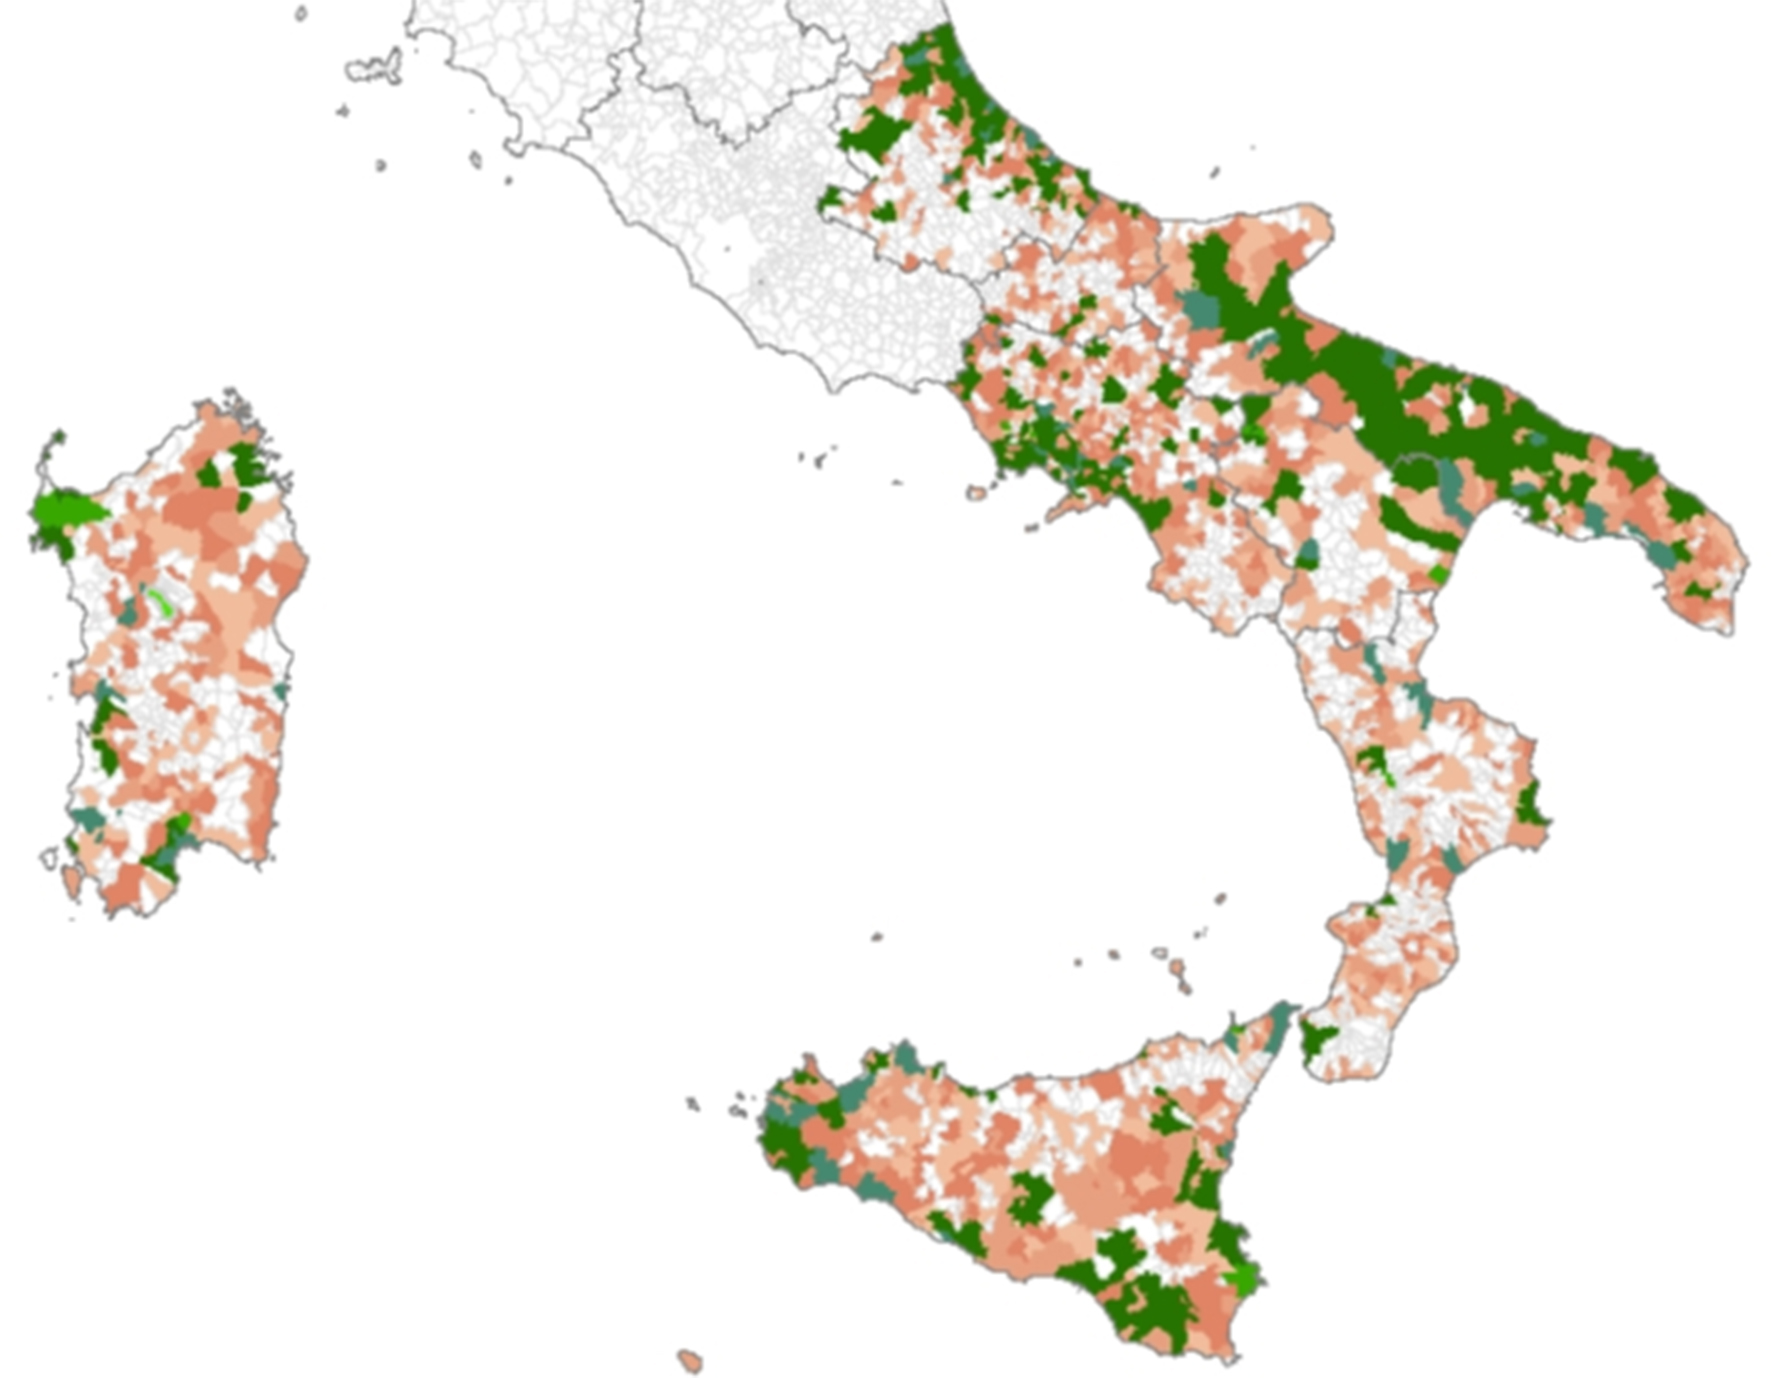 Export-led value added in manufacturing in the South of Italy at the municipality level.